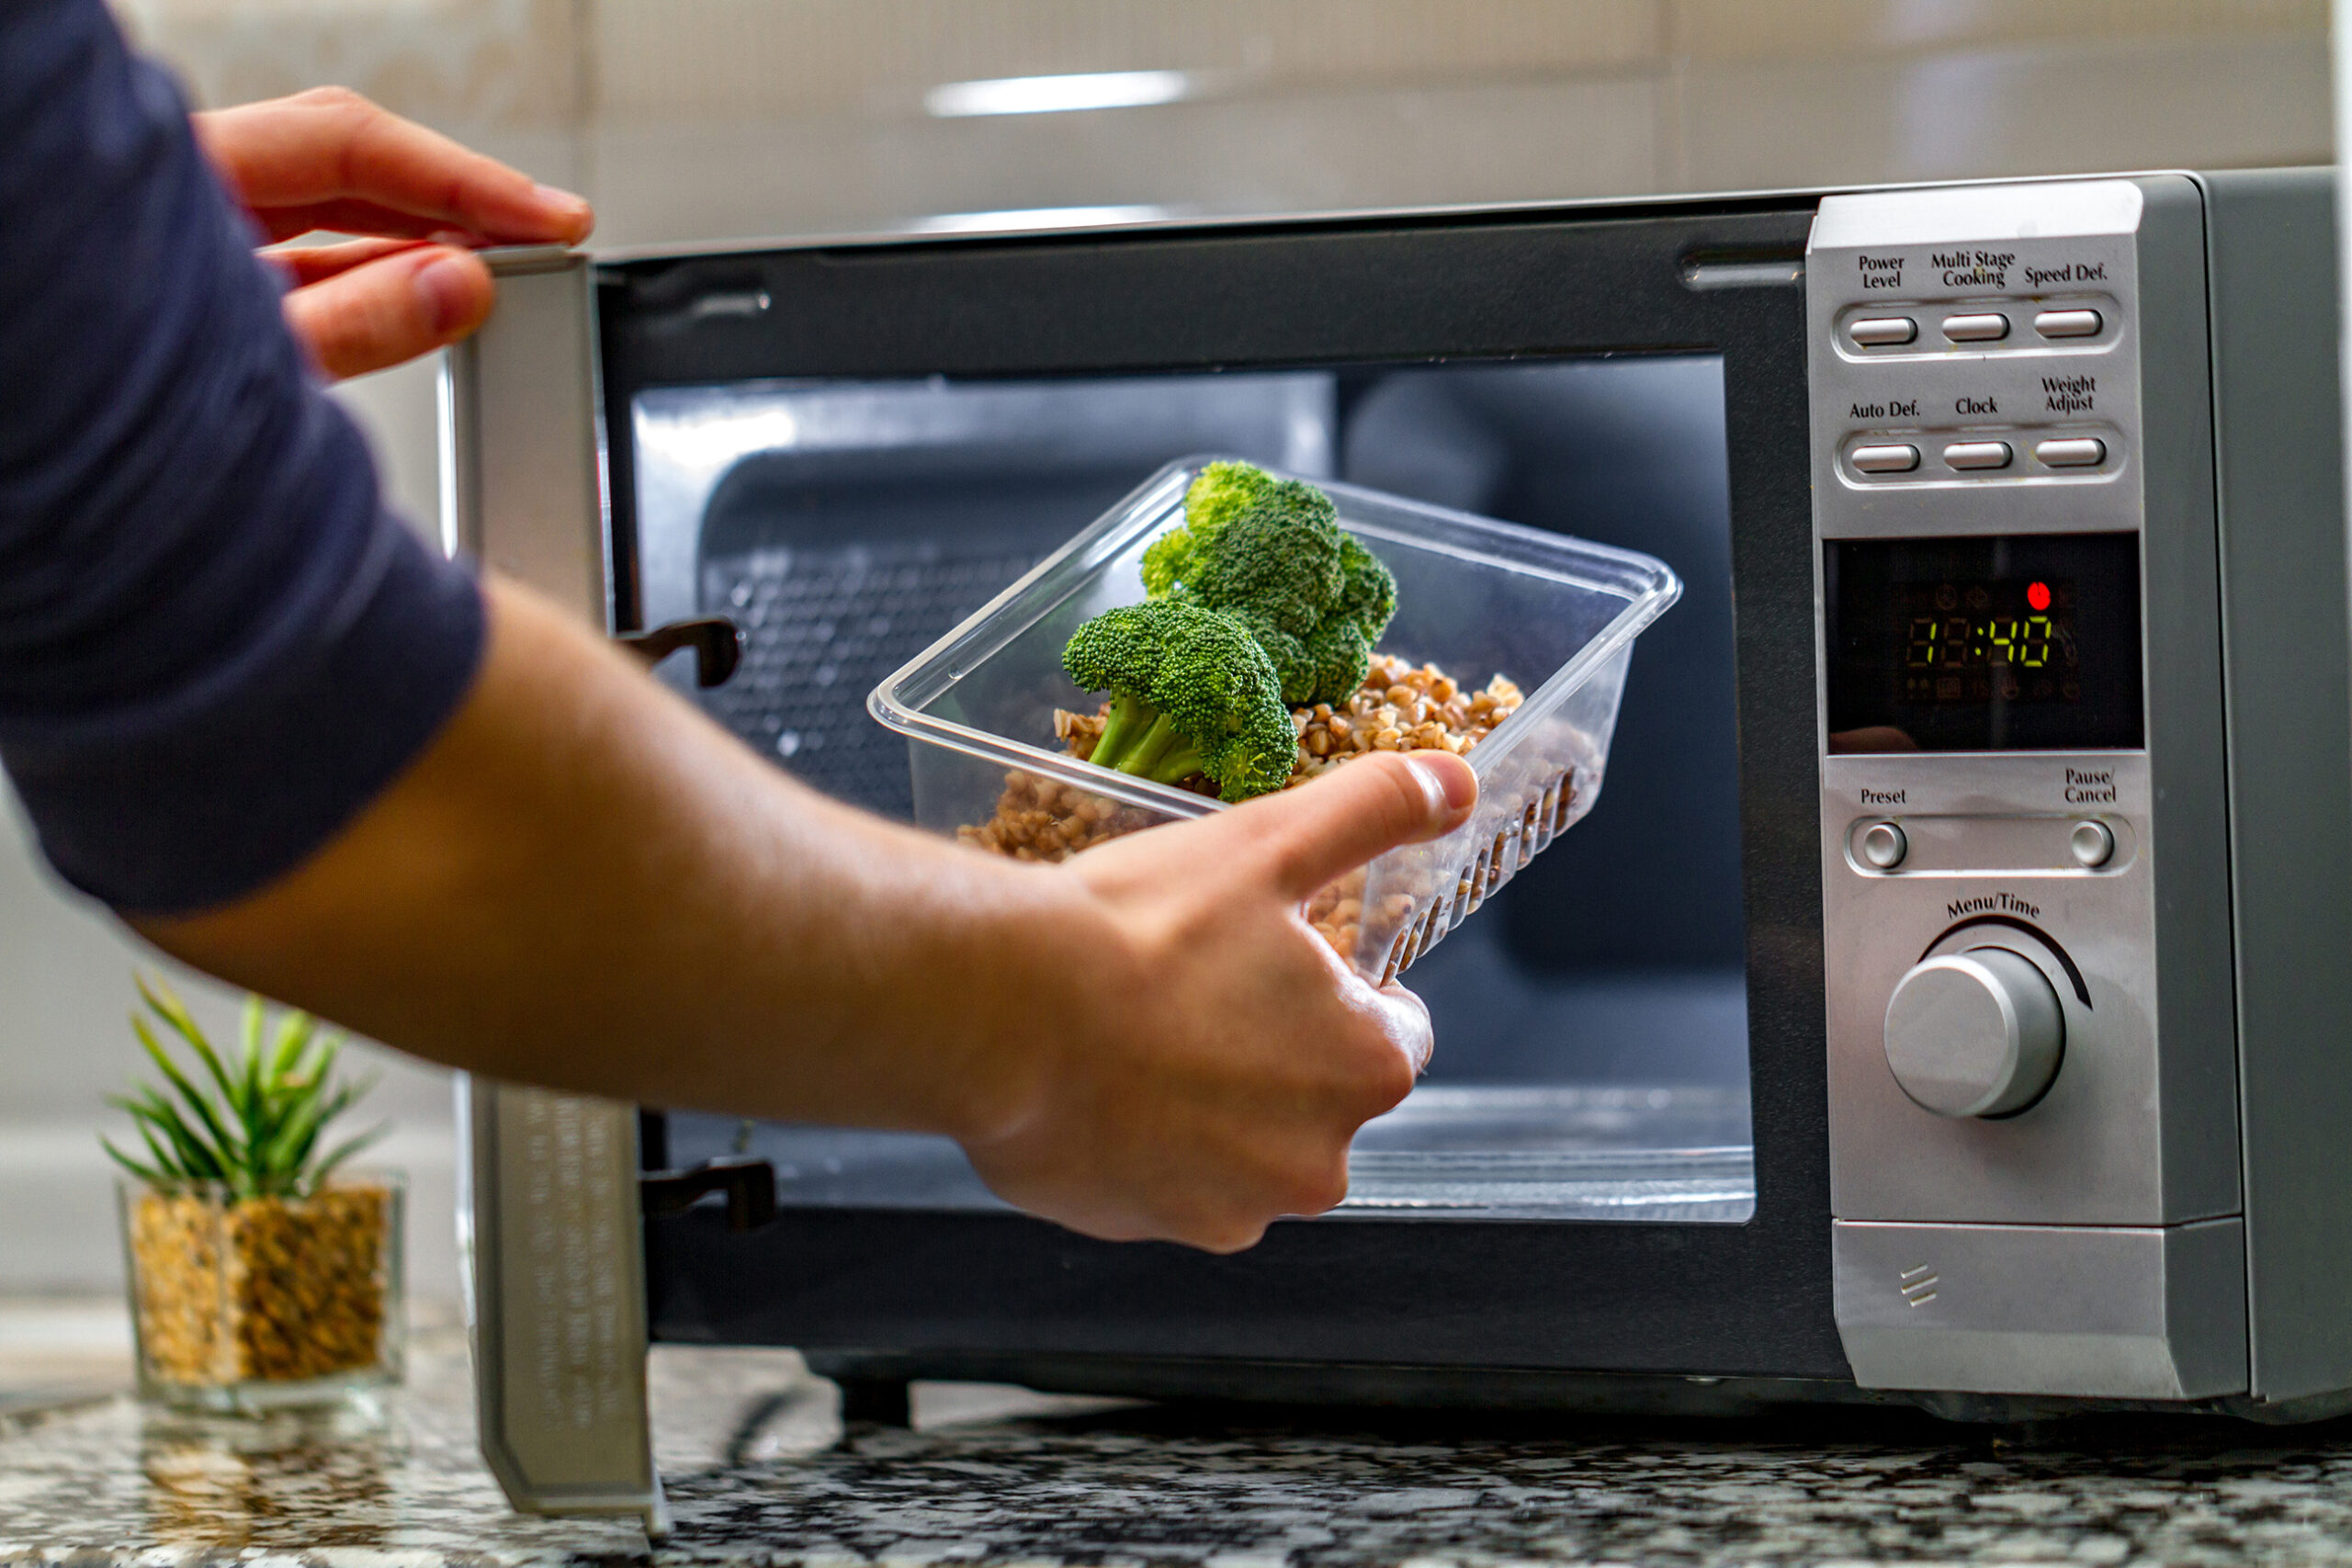 https://www.chemicalsafetyfacts.org/wp-content/uploads/person-putting-food-into-microwave-scaled.jpg